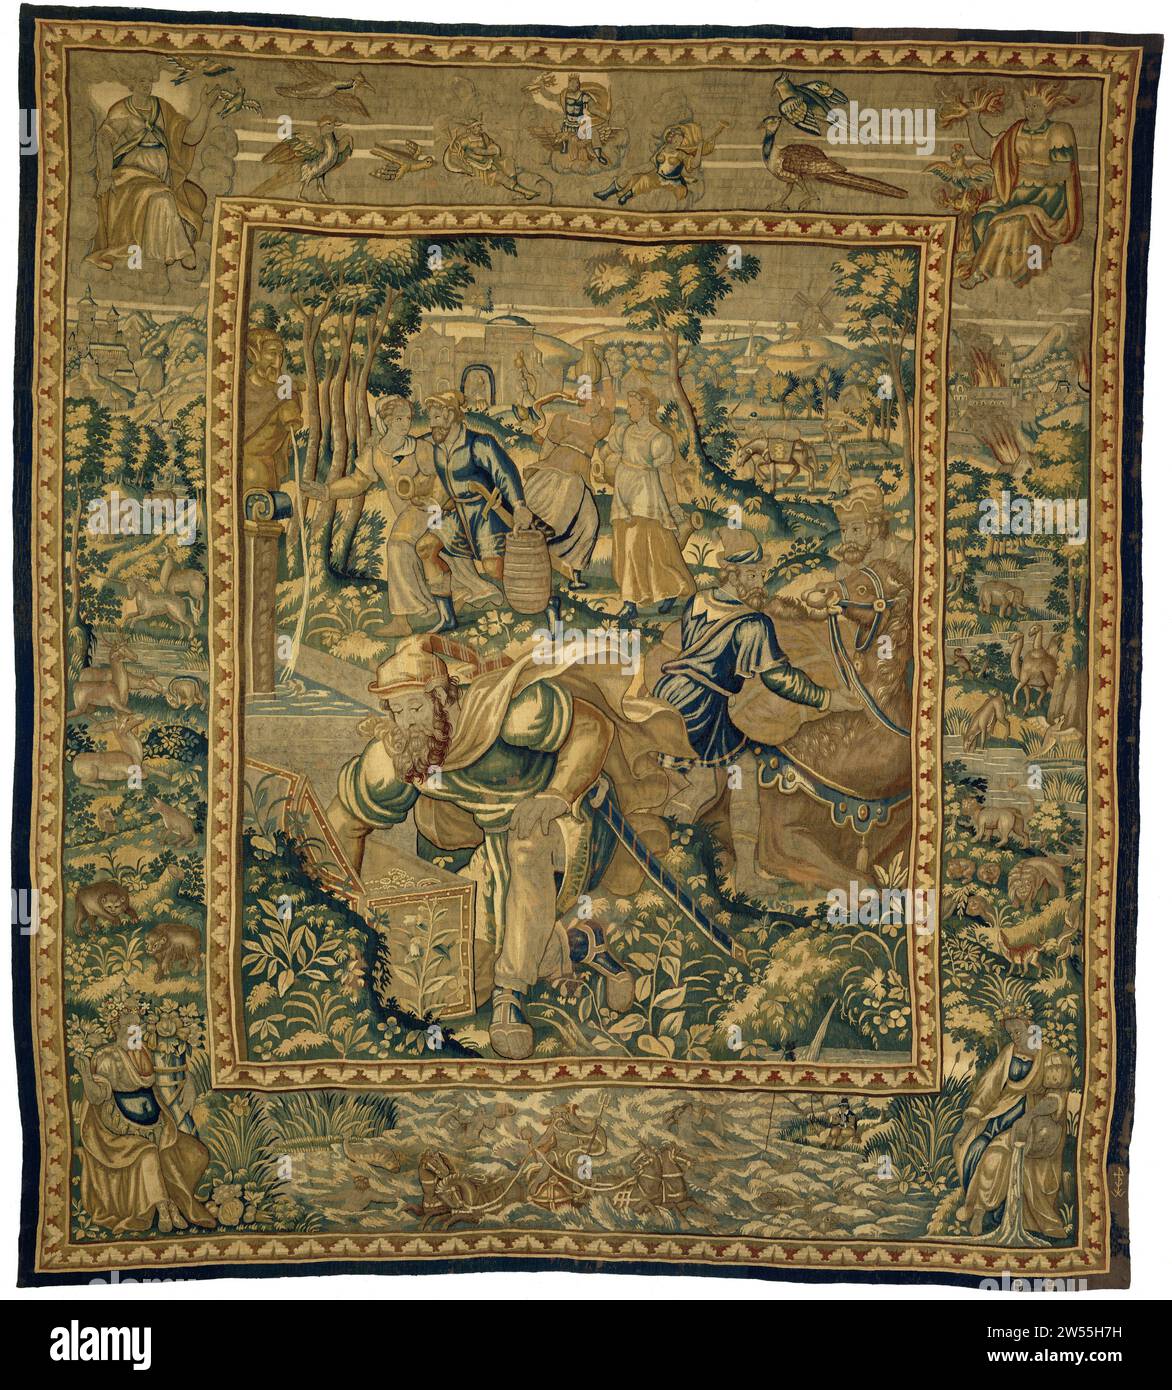 The arrival of Eliezer at the source, Anonymous, c. 1575 - c. 1600 Wall carpet with the arrival of Eliezer (Gen. 24 and 29), from a series of tapestries with the history of Rebekka and Eliëzer (Gen.24) with edges with animals and the four elements in the corners; With the weaver brand of Willem de Kempenere. Brussels Ketting: Wool. Entry: Wool. Entry: Silk tapestry Wall carpet with the arrival of Eliezer (Gen. 24 and 29), from a series of tapestries with the history of Rebekka and Eliëzer (Gen.24) with edges with animals and the four elements in the corners; With the weaver brand of Willem de Stock Photo